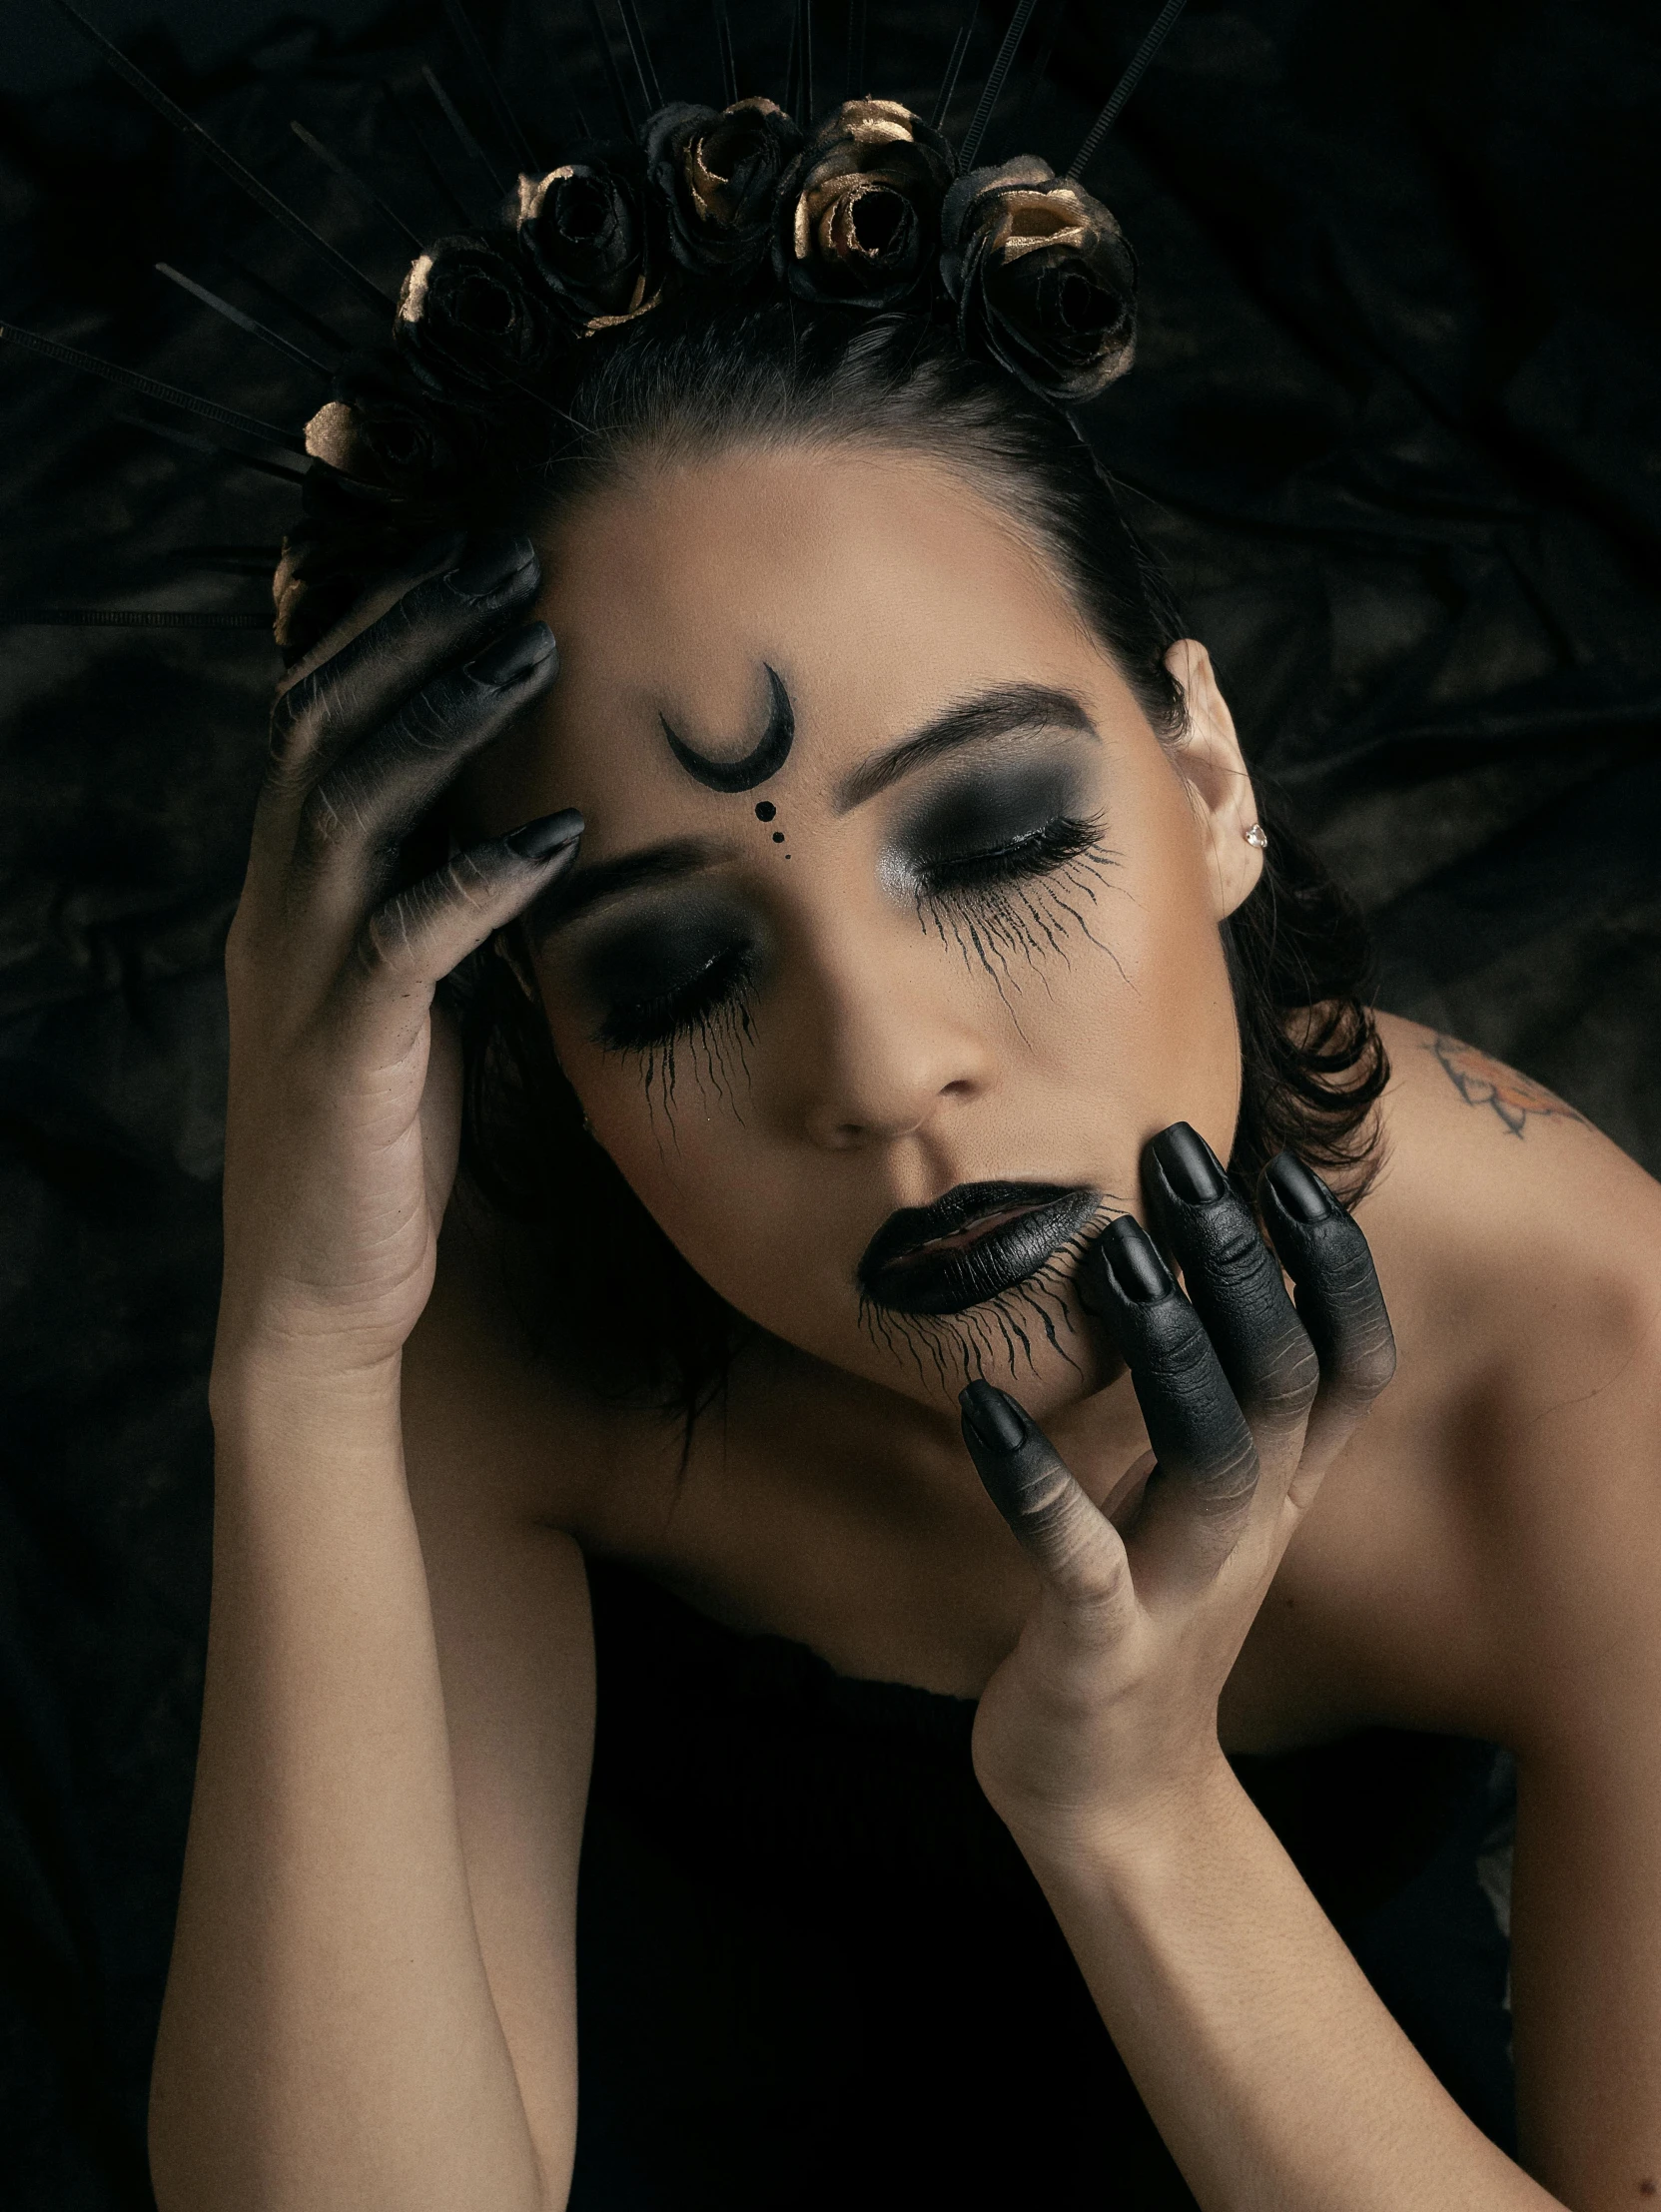 a person wearing black makeup posing for the camera